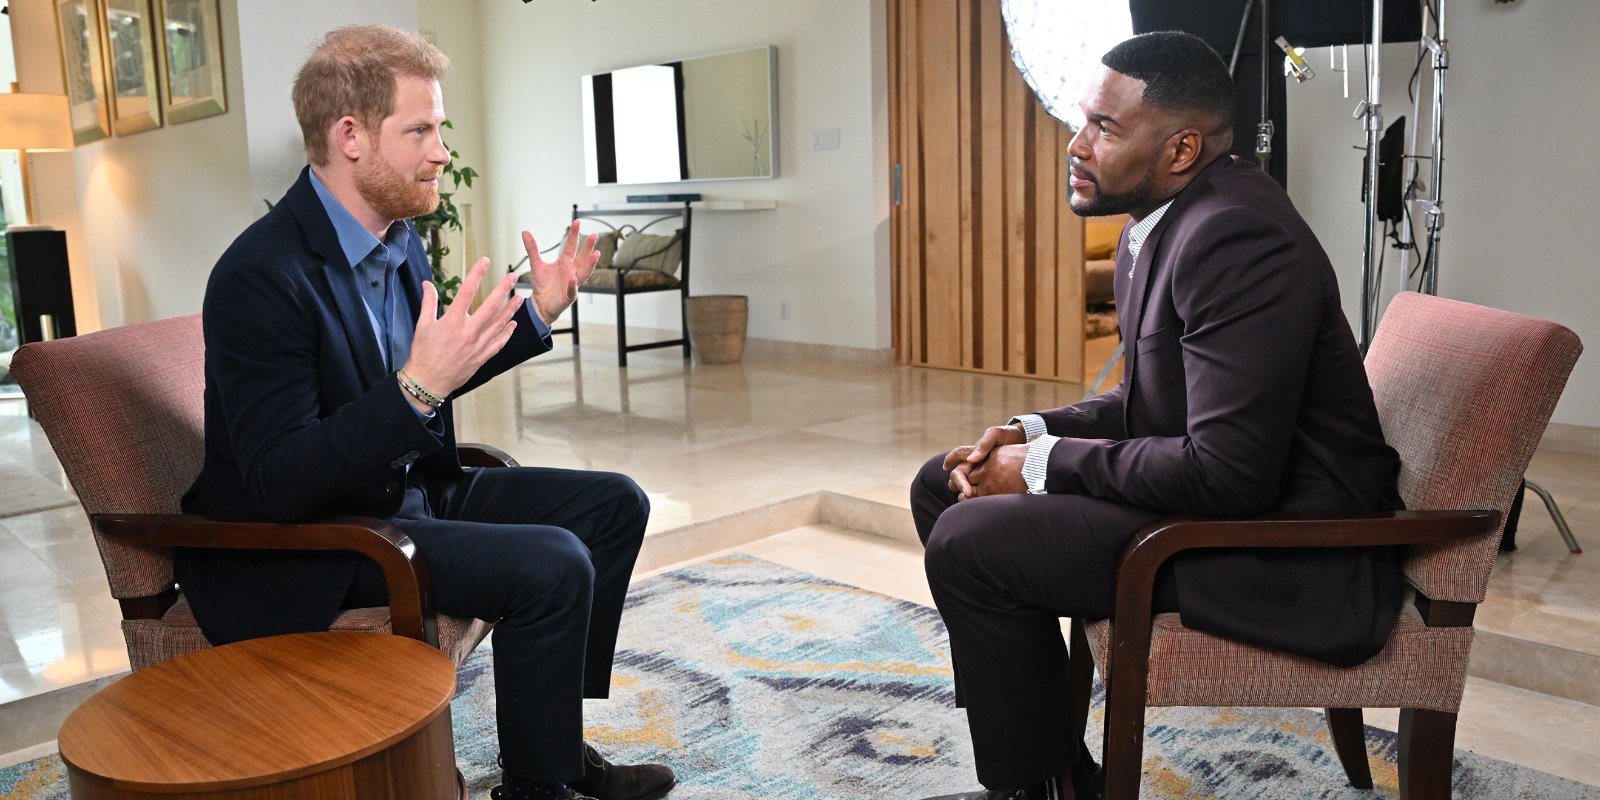 Prince Harry and Michael Strahan speak during the Duke of Sussex' interview for 'Good Morning America.'